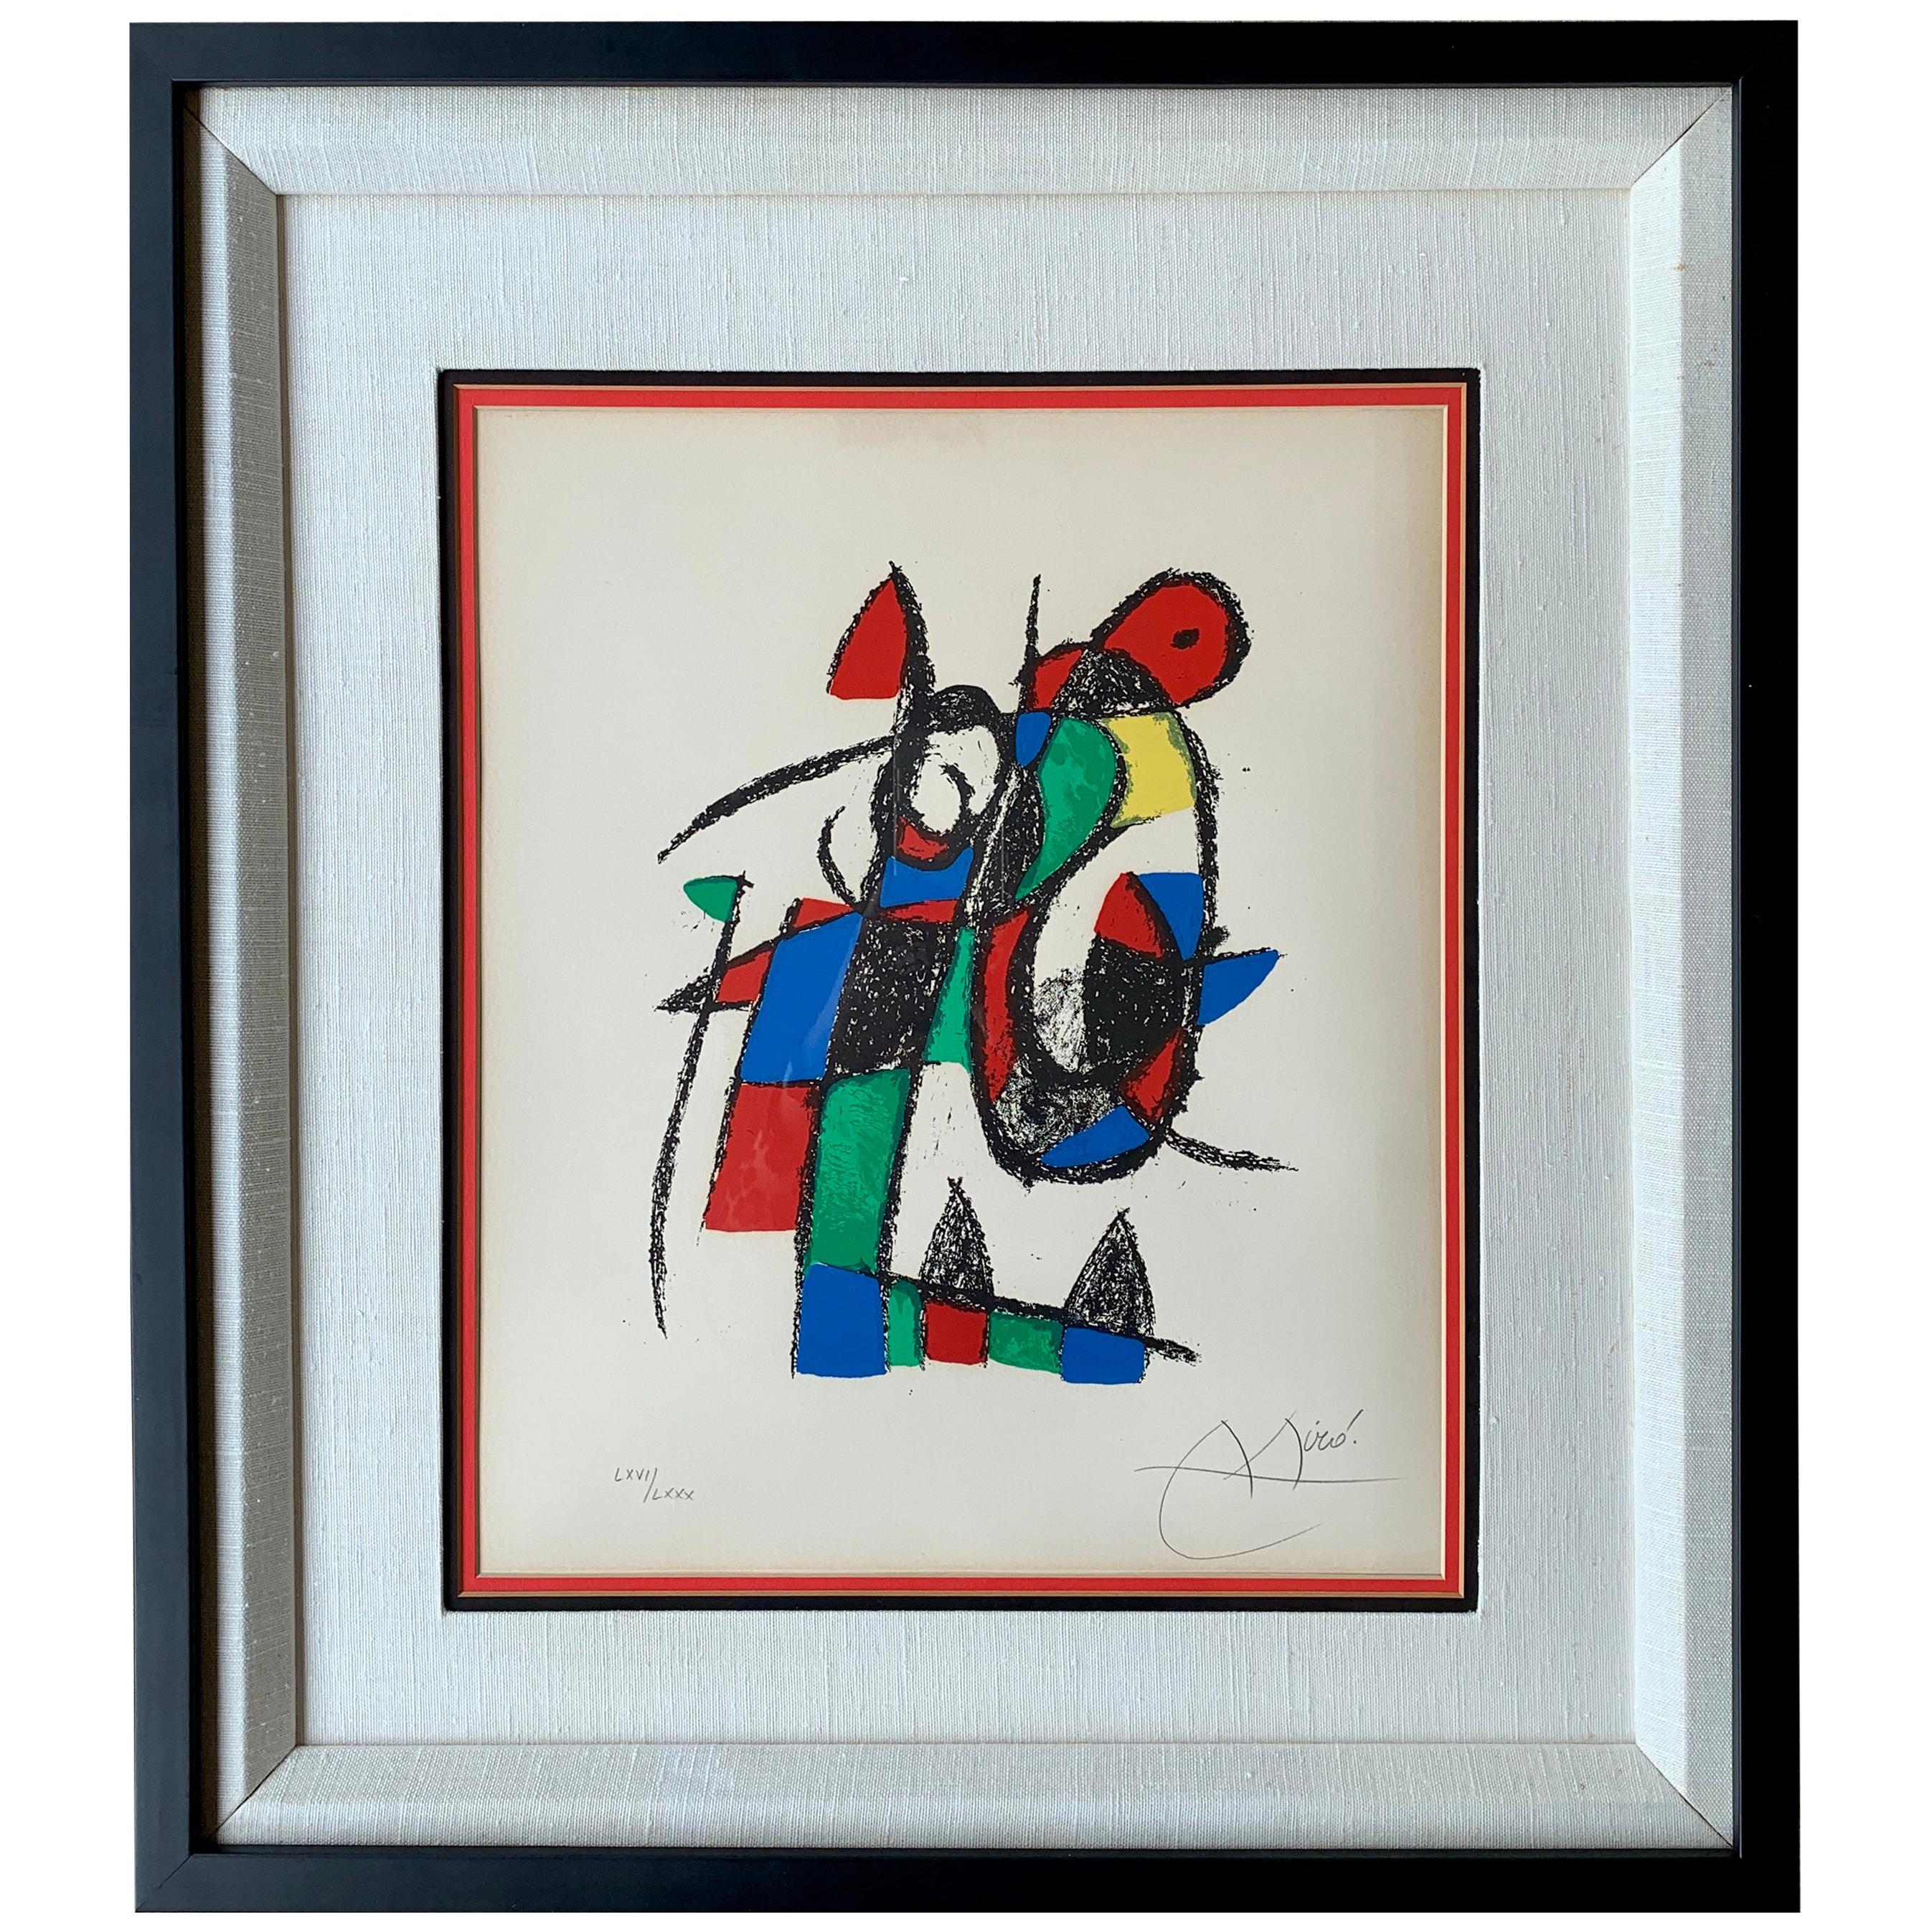 Signed Joan Miro Abstract Limited Edition Lithograph from "Lithograph II" 1975